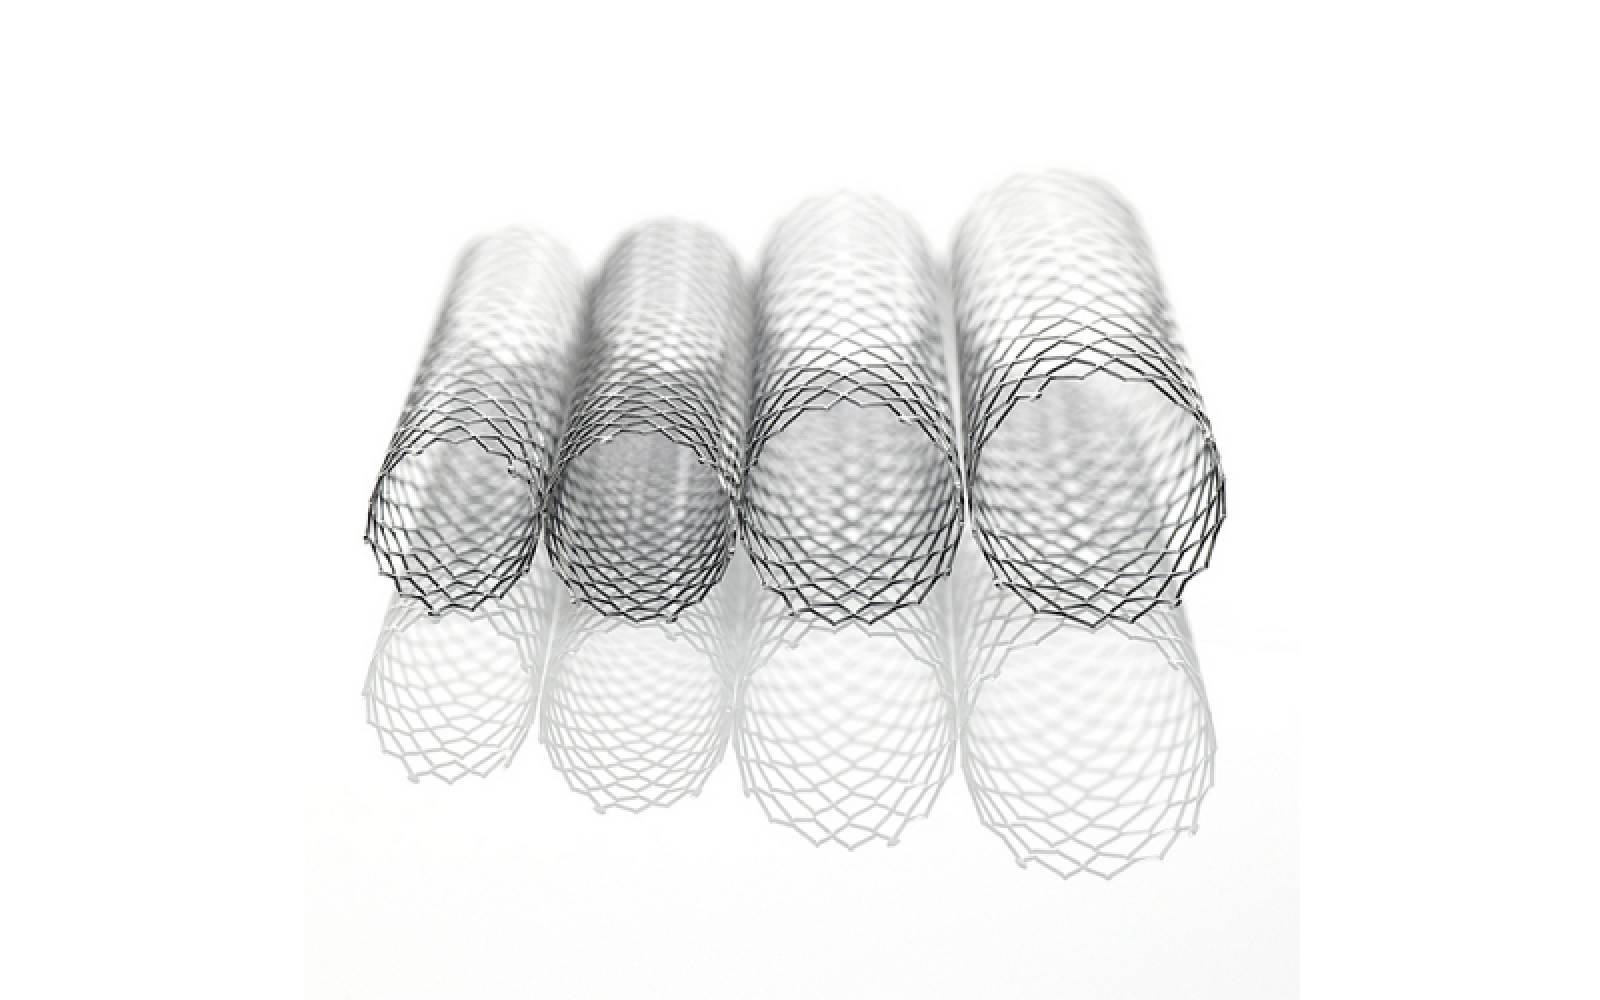 Protégé™ GPS™ Self-expanding Peripheral and Biliary Stent (Medtronic)